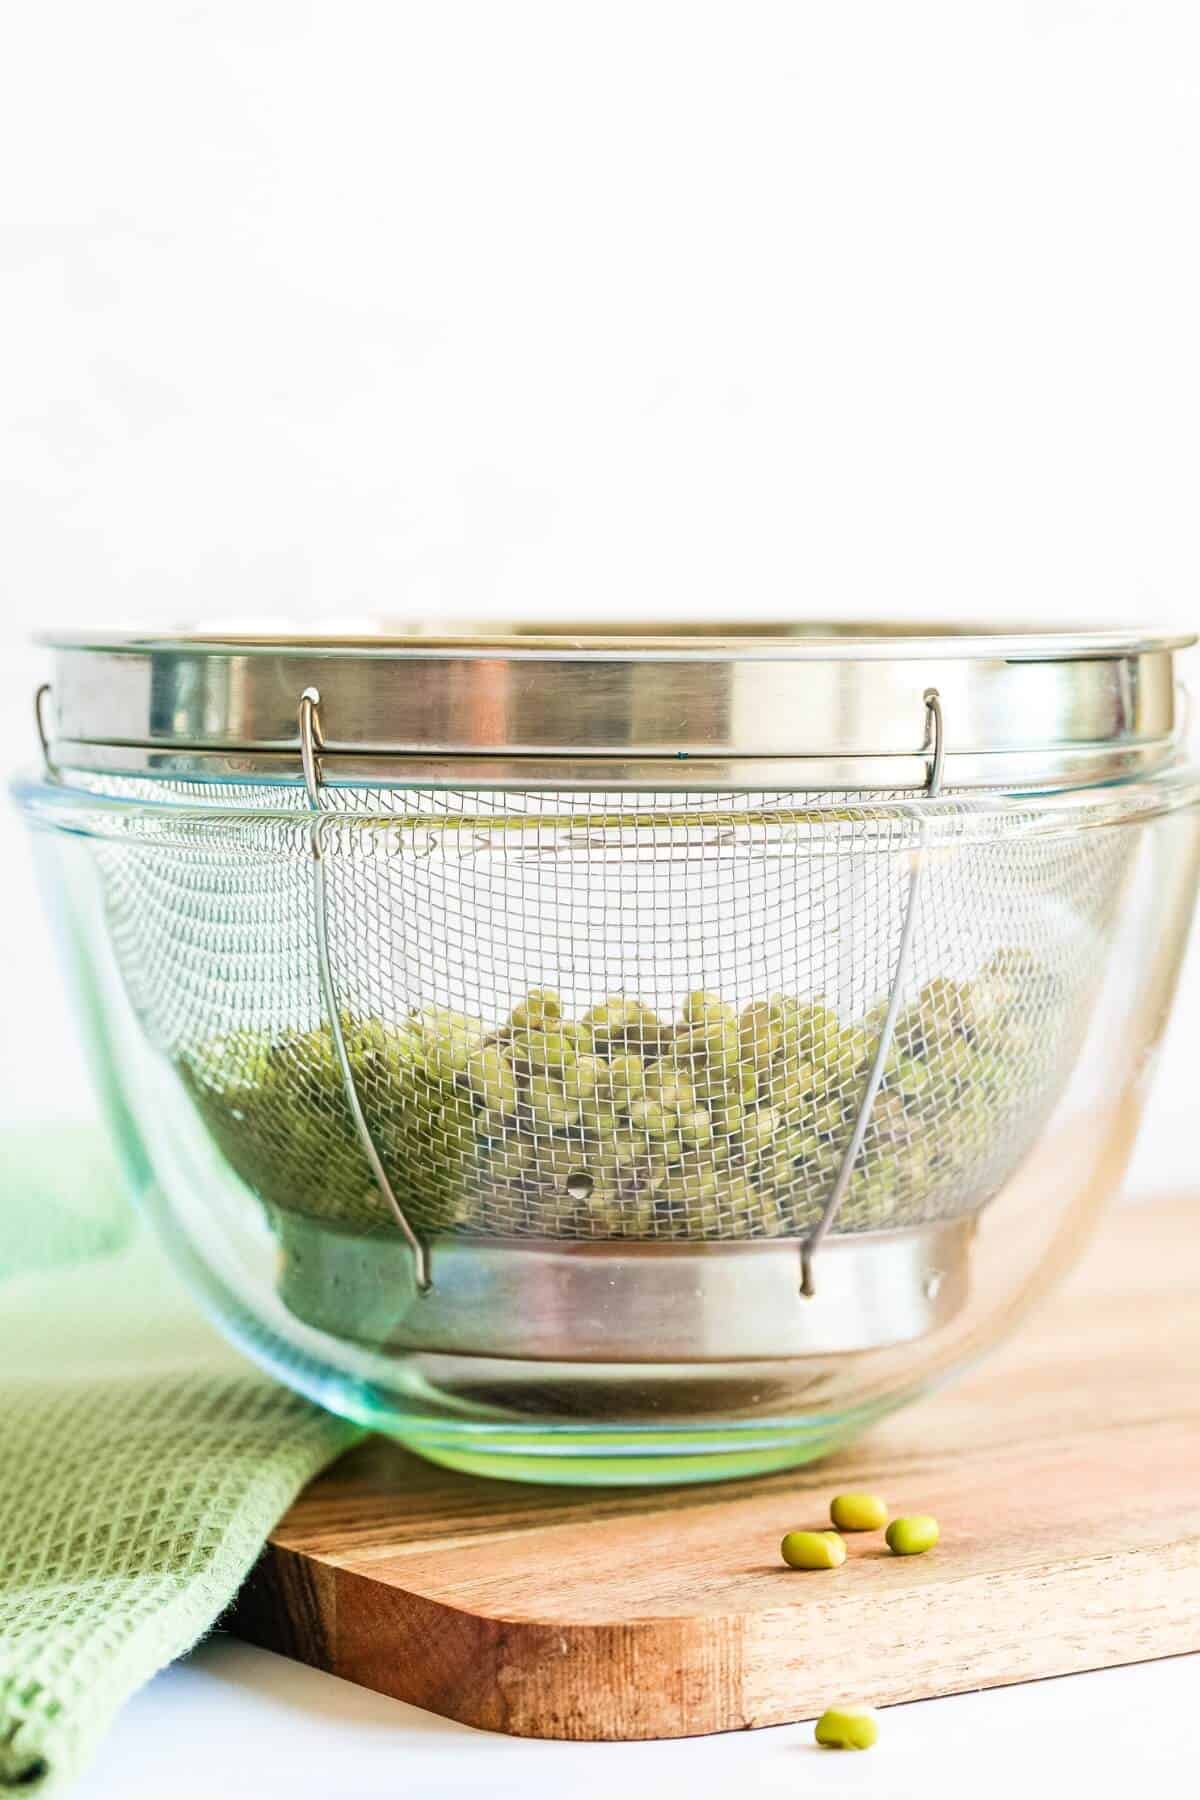 A metal strainer filled with mung beans is sat in a glass bowl on a wooden chopping board. A folded green tea towel is to the left.